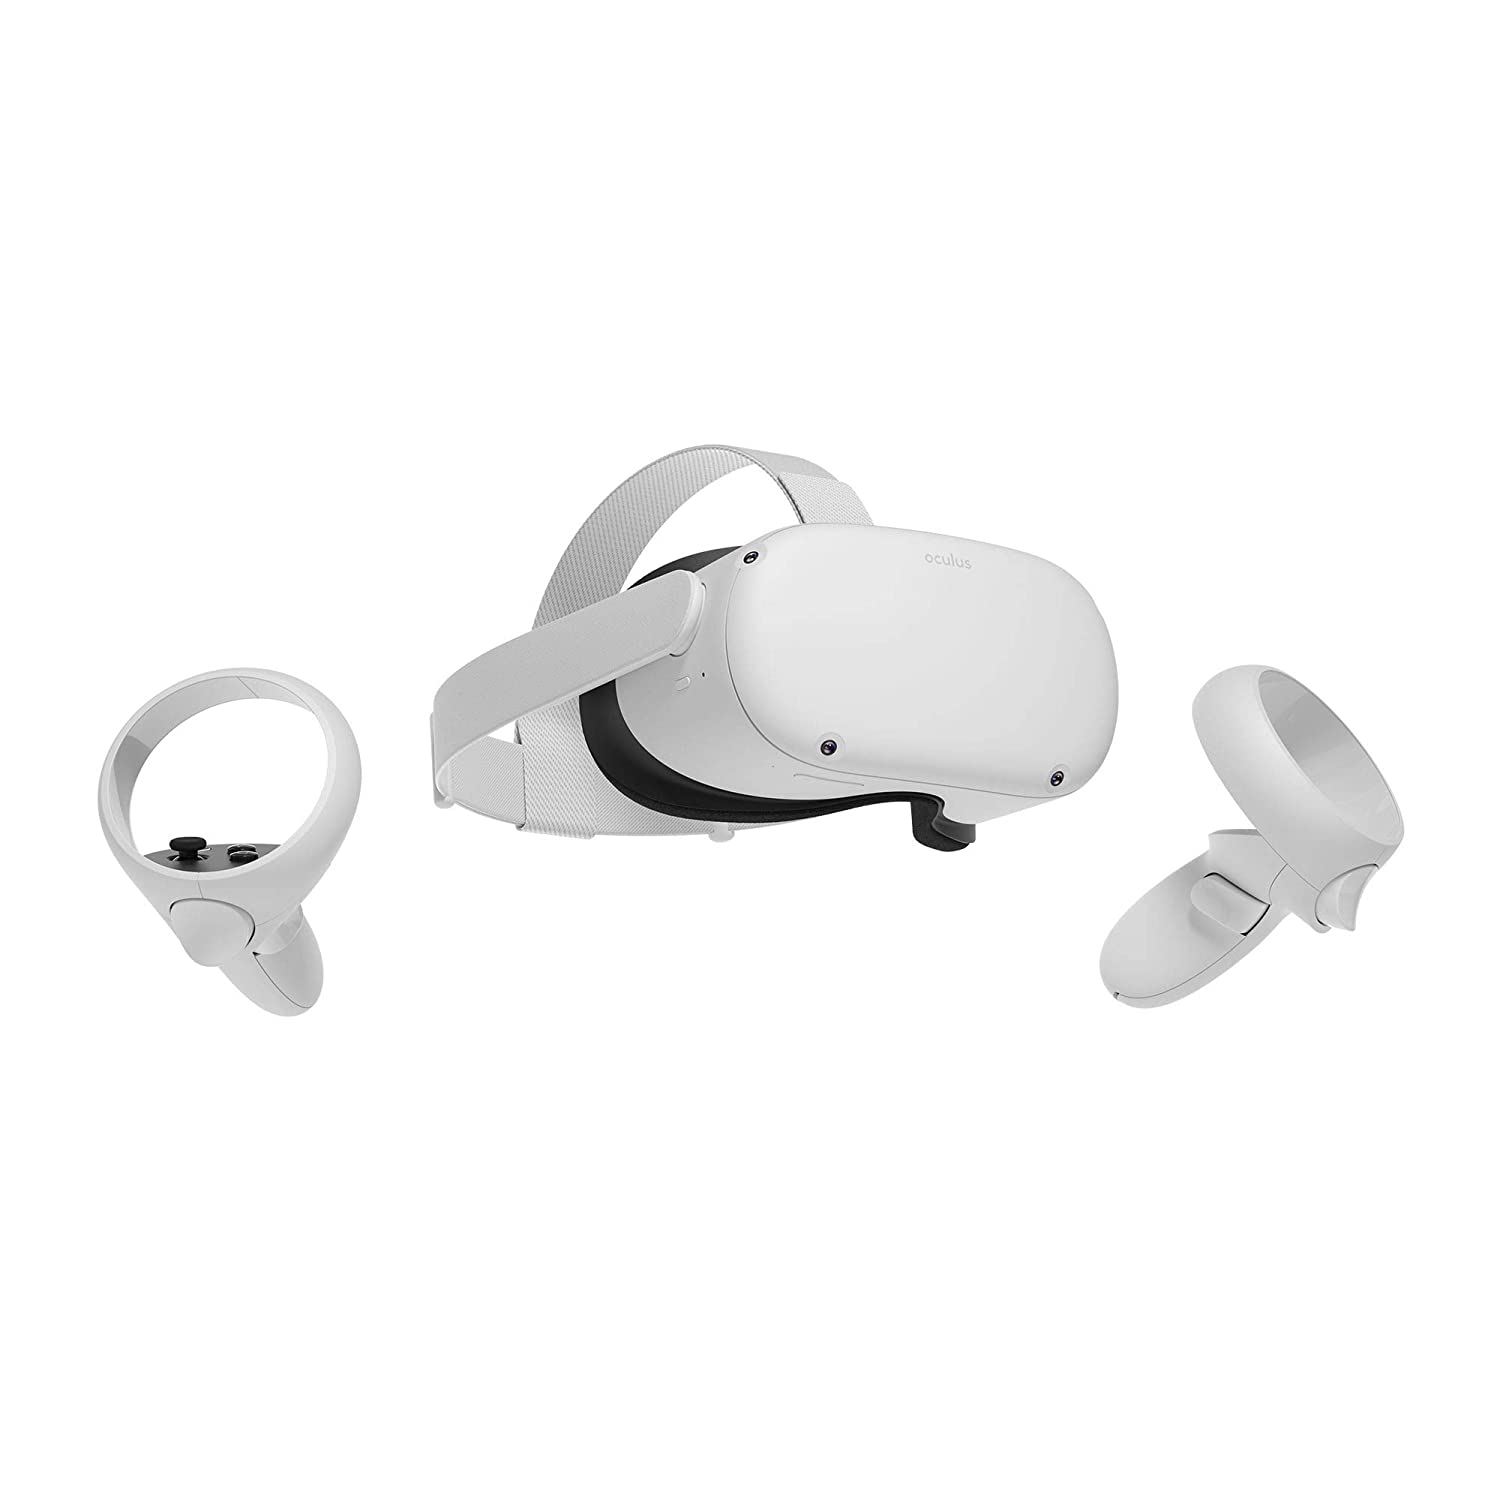 Oculus Quest 2 headsets with controllers